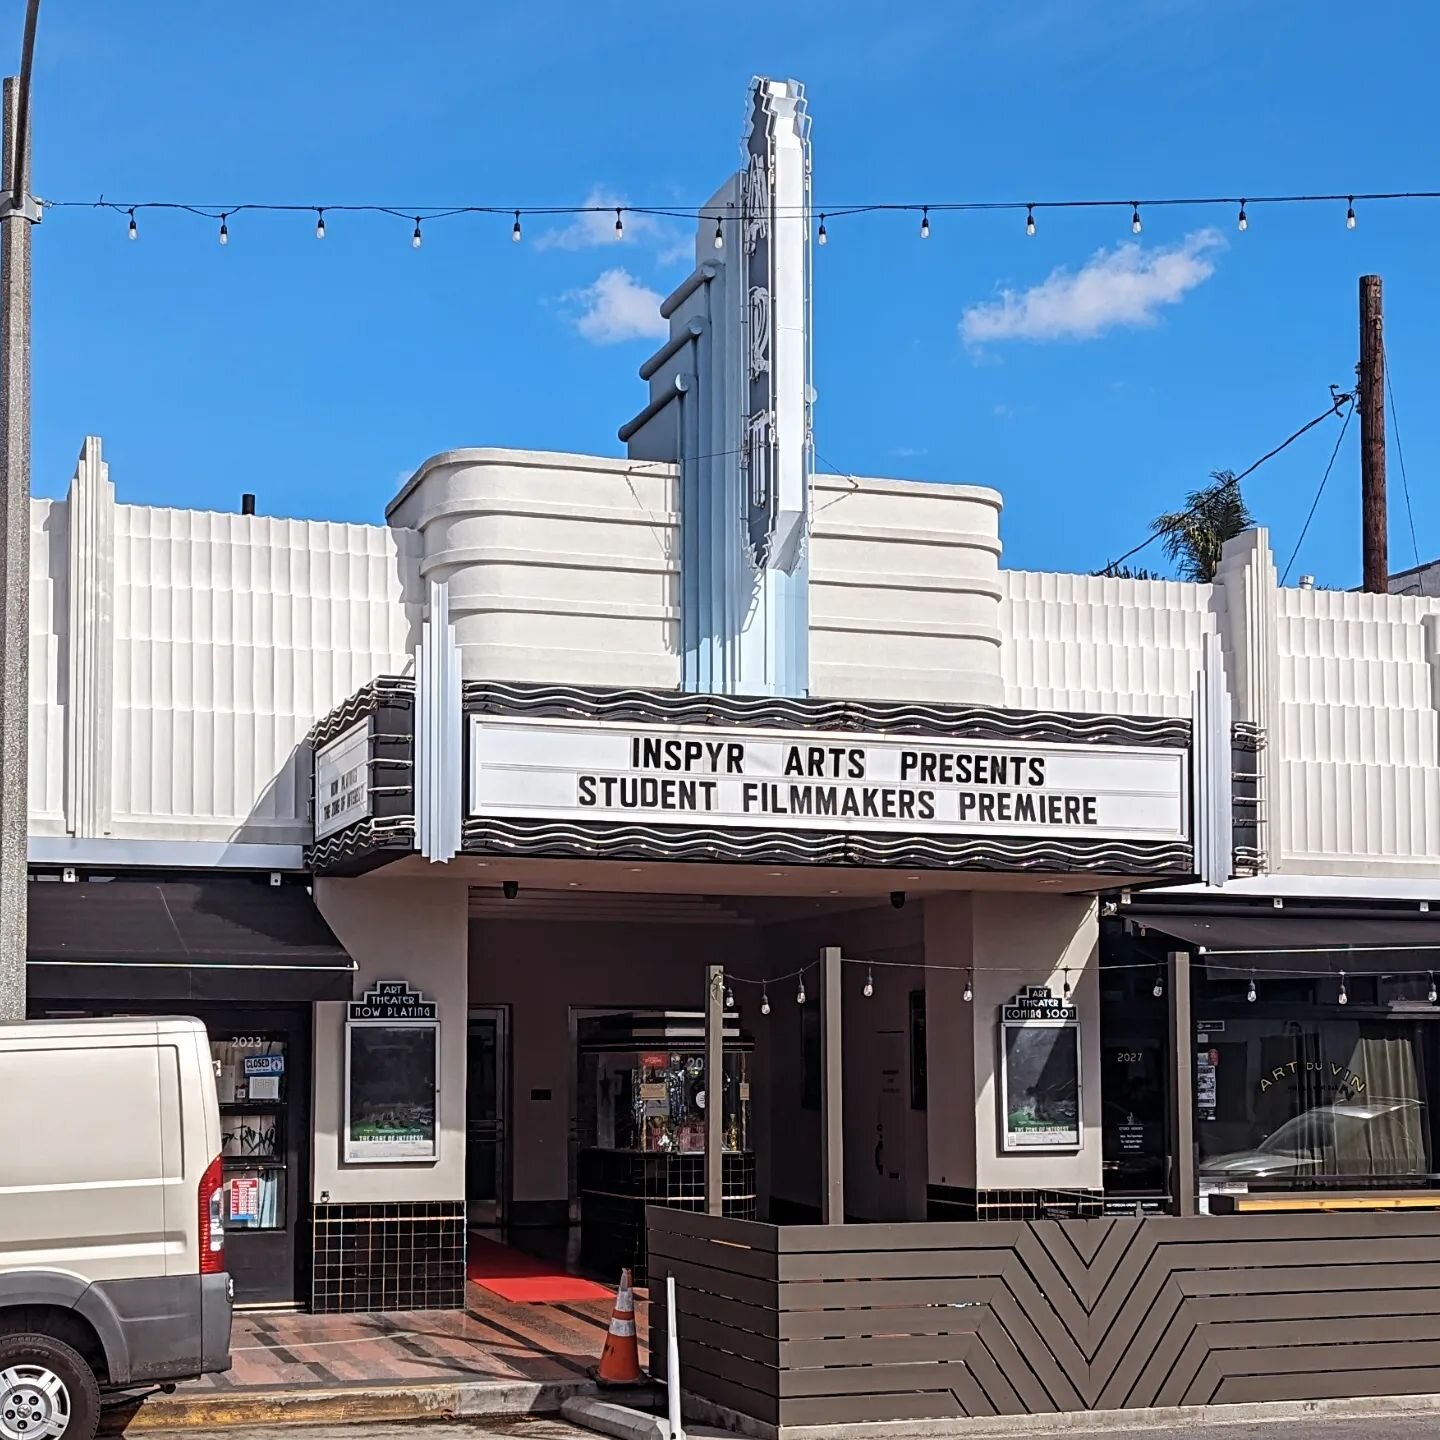 Our screening of our young filmmaker students' short films was a blast! Huge thanks to the @arttheatrelongbeach for hosting us. And congrats to our students for their first successful film premiere!

To learn more about our filmmaking and acting for 